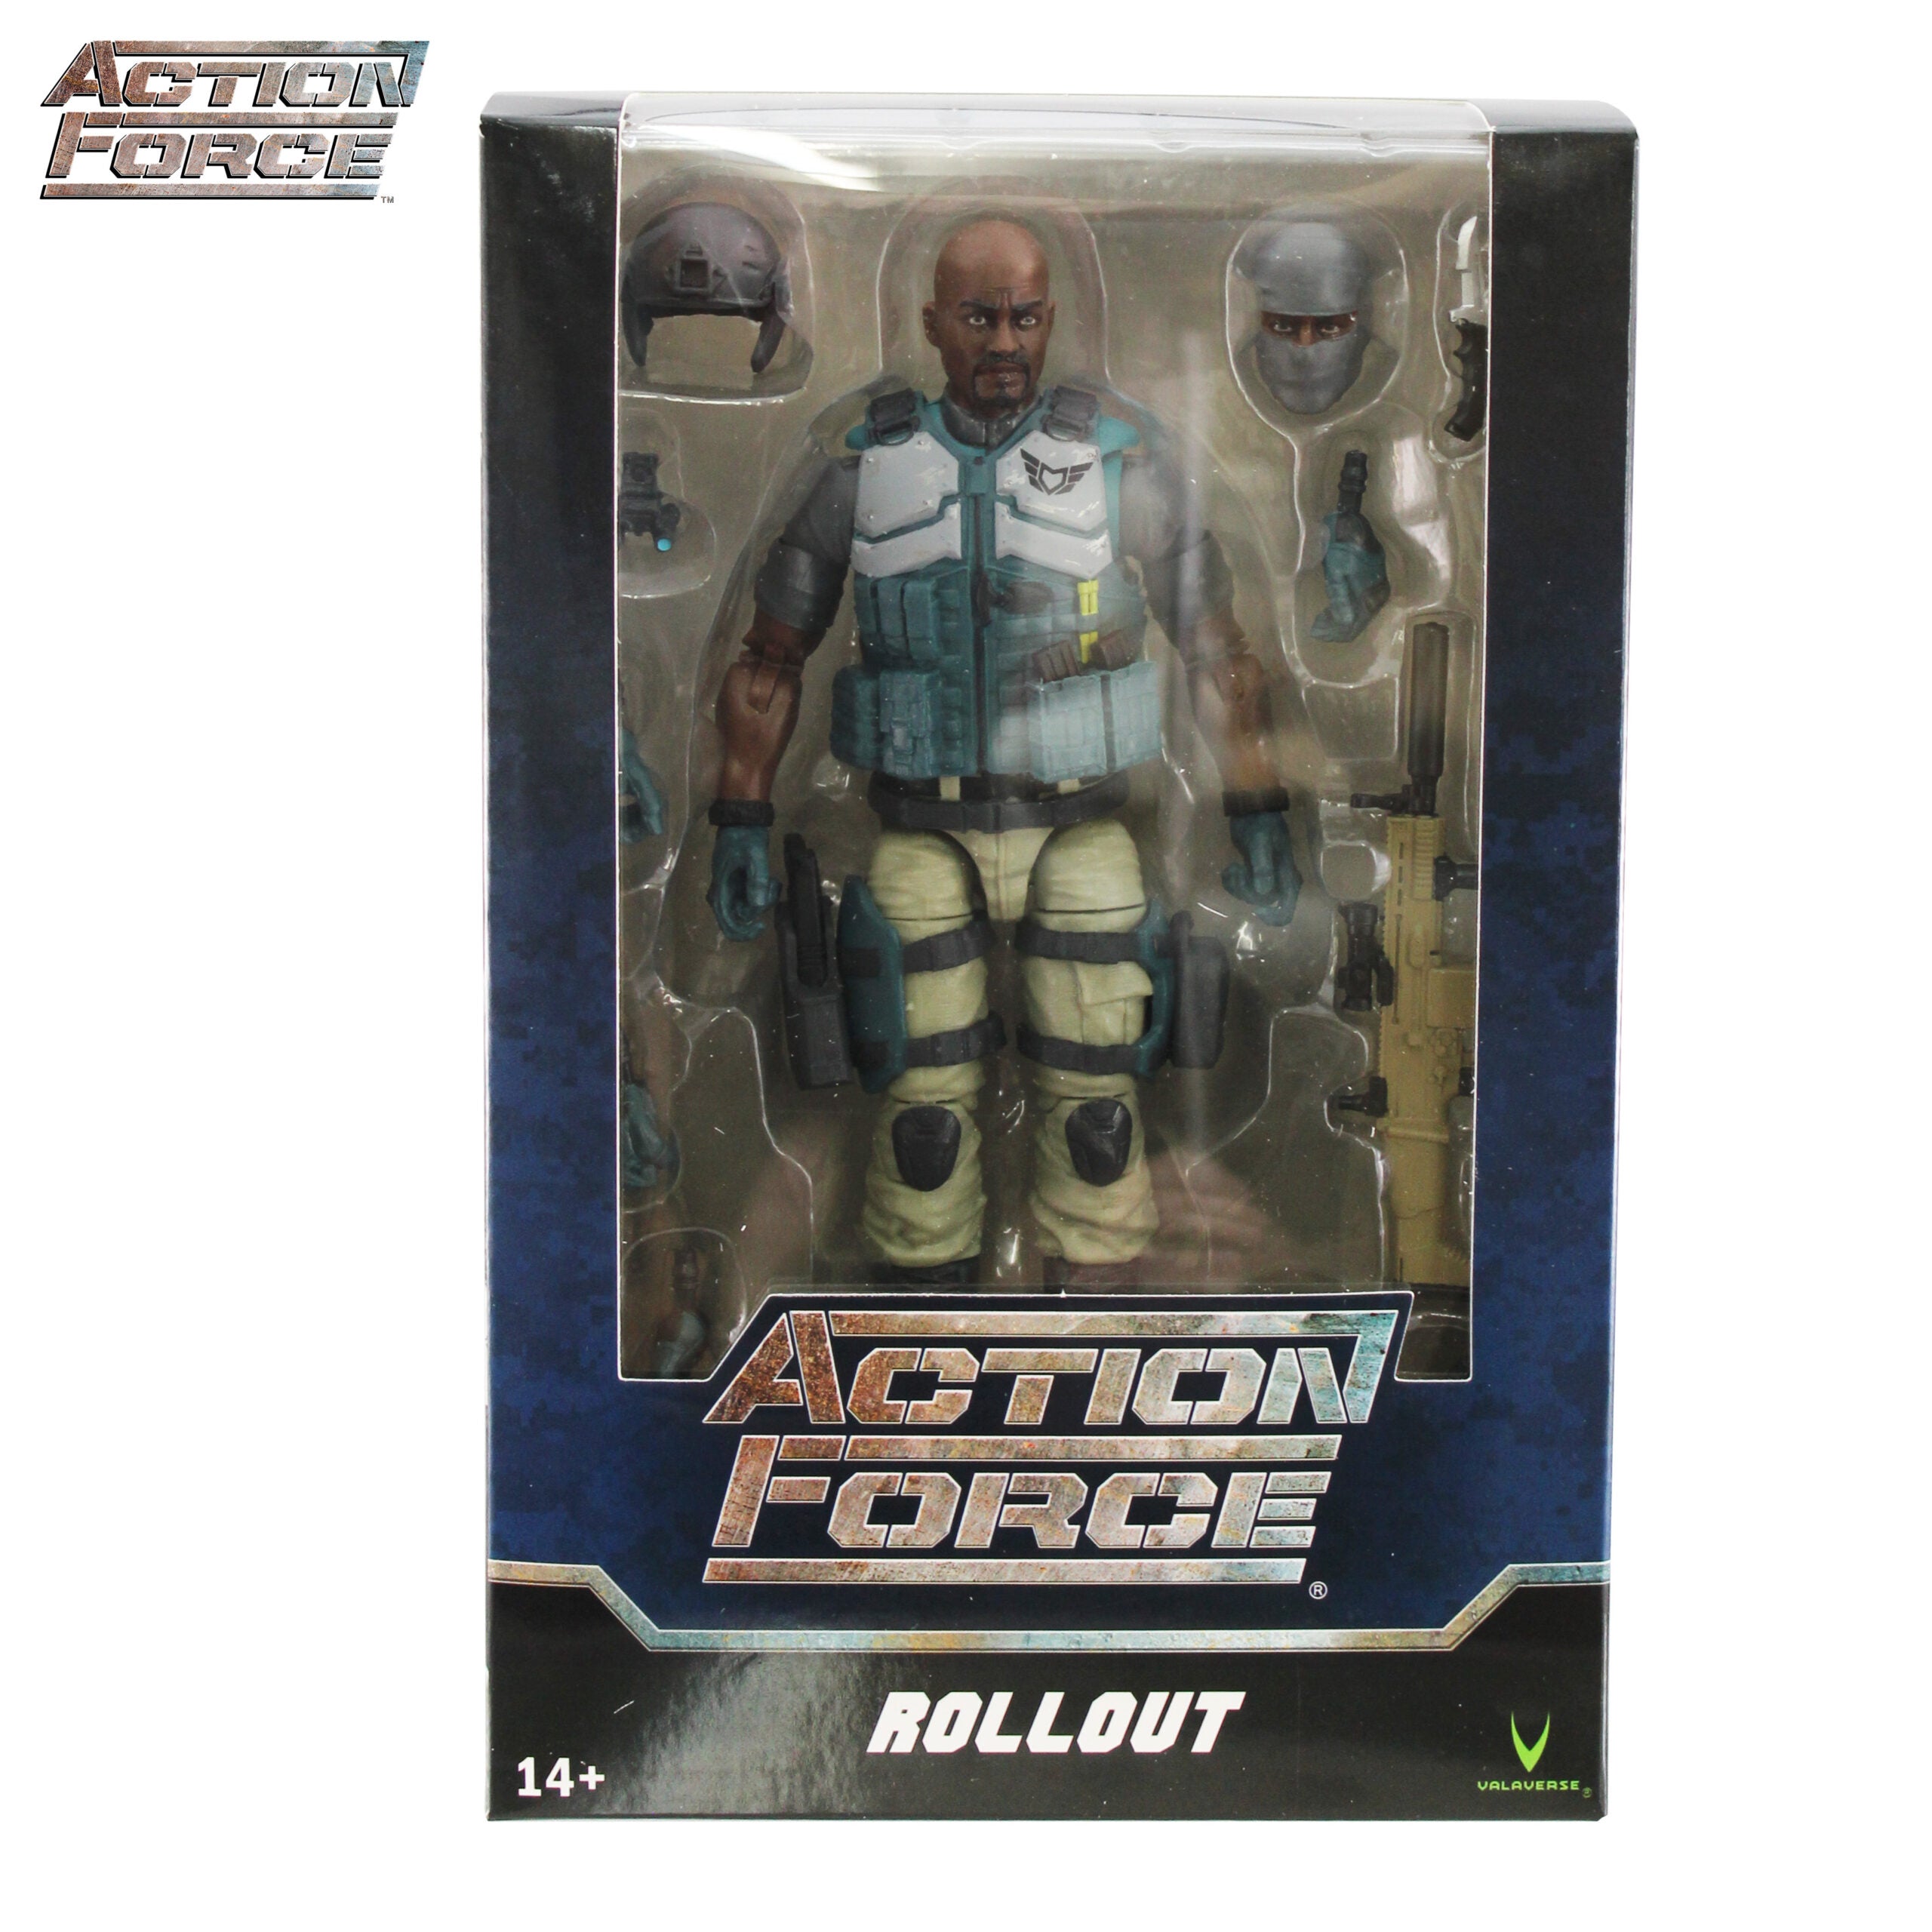 Valaverse - In case you were wondering if the Action Force